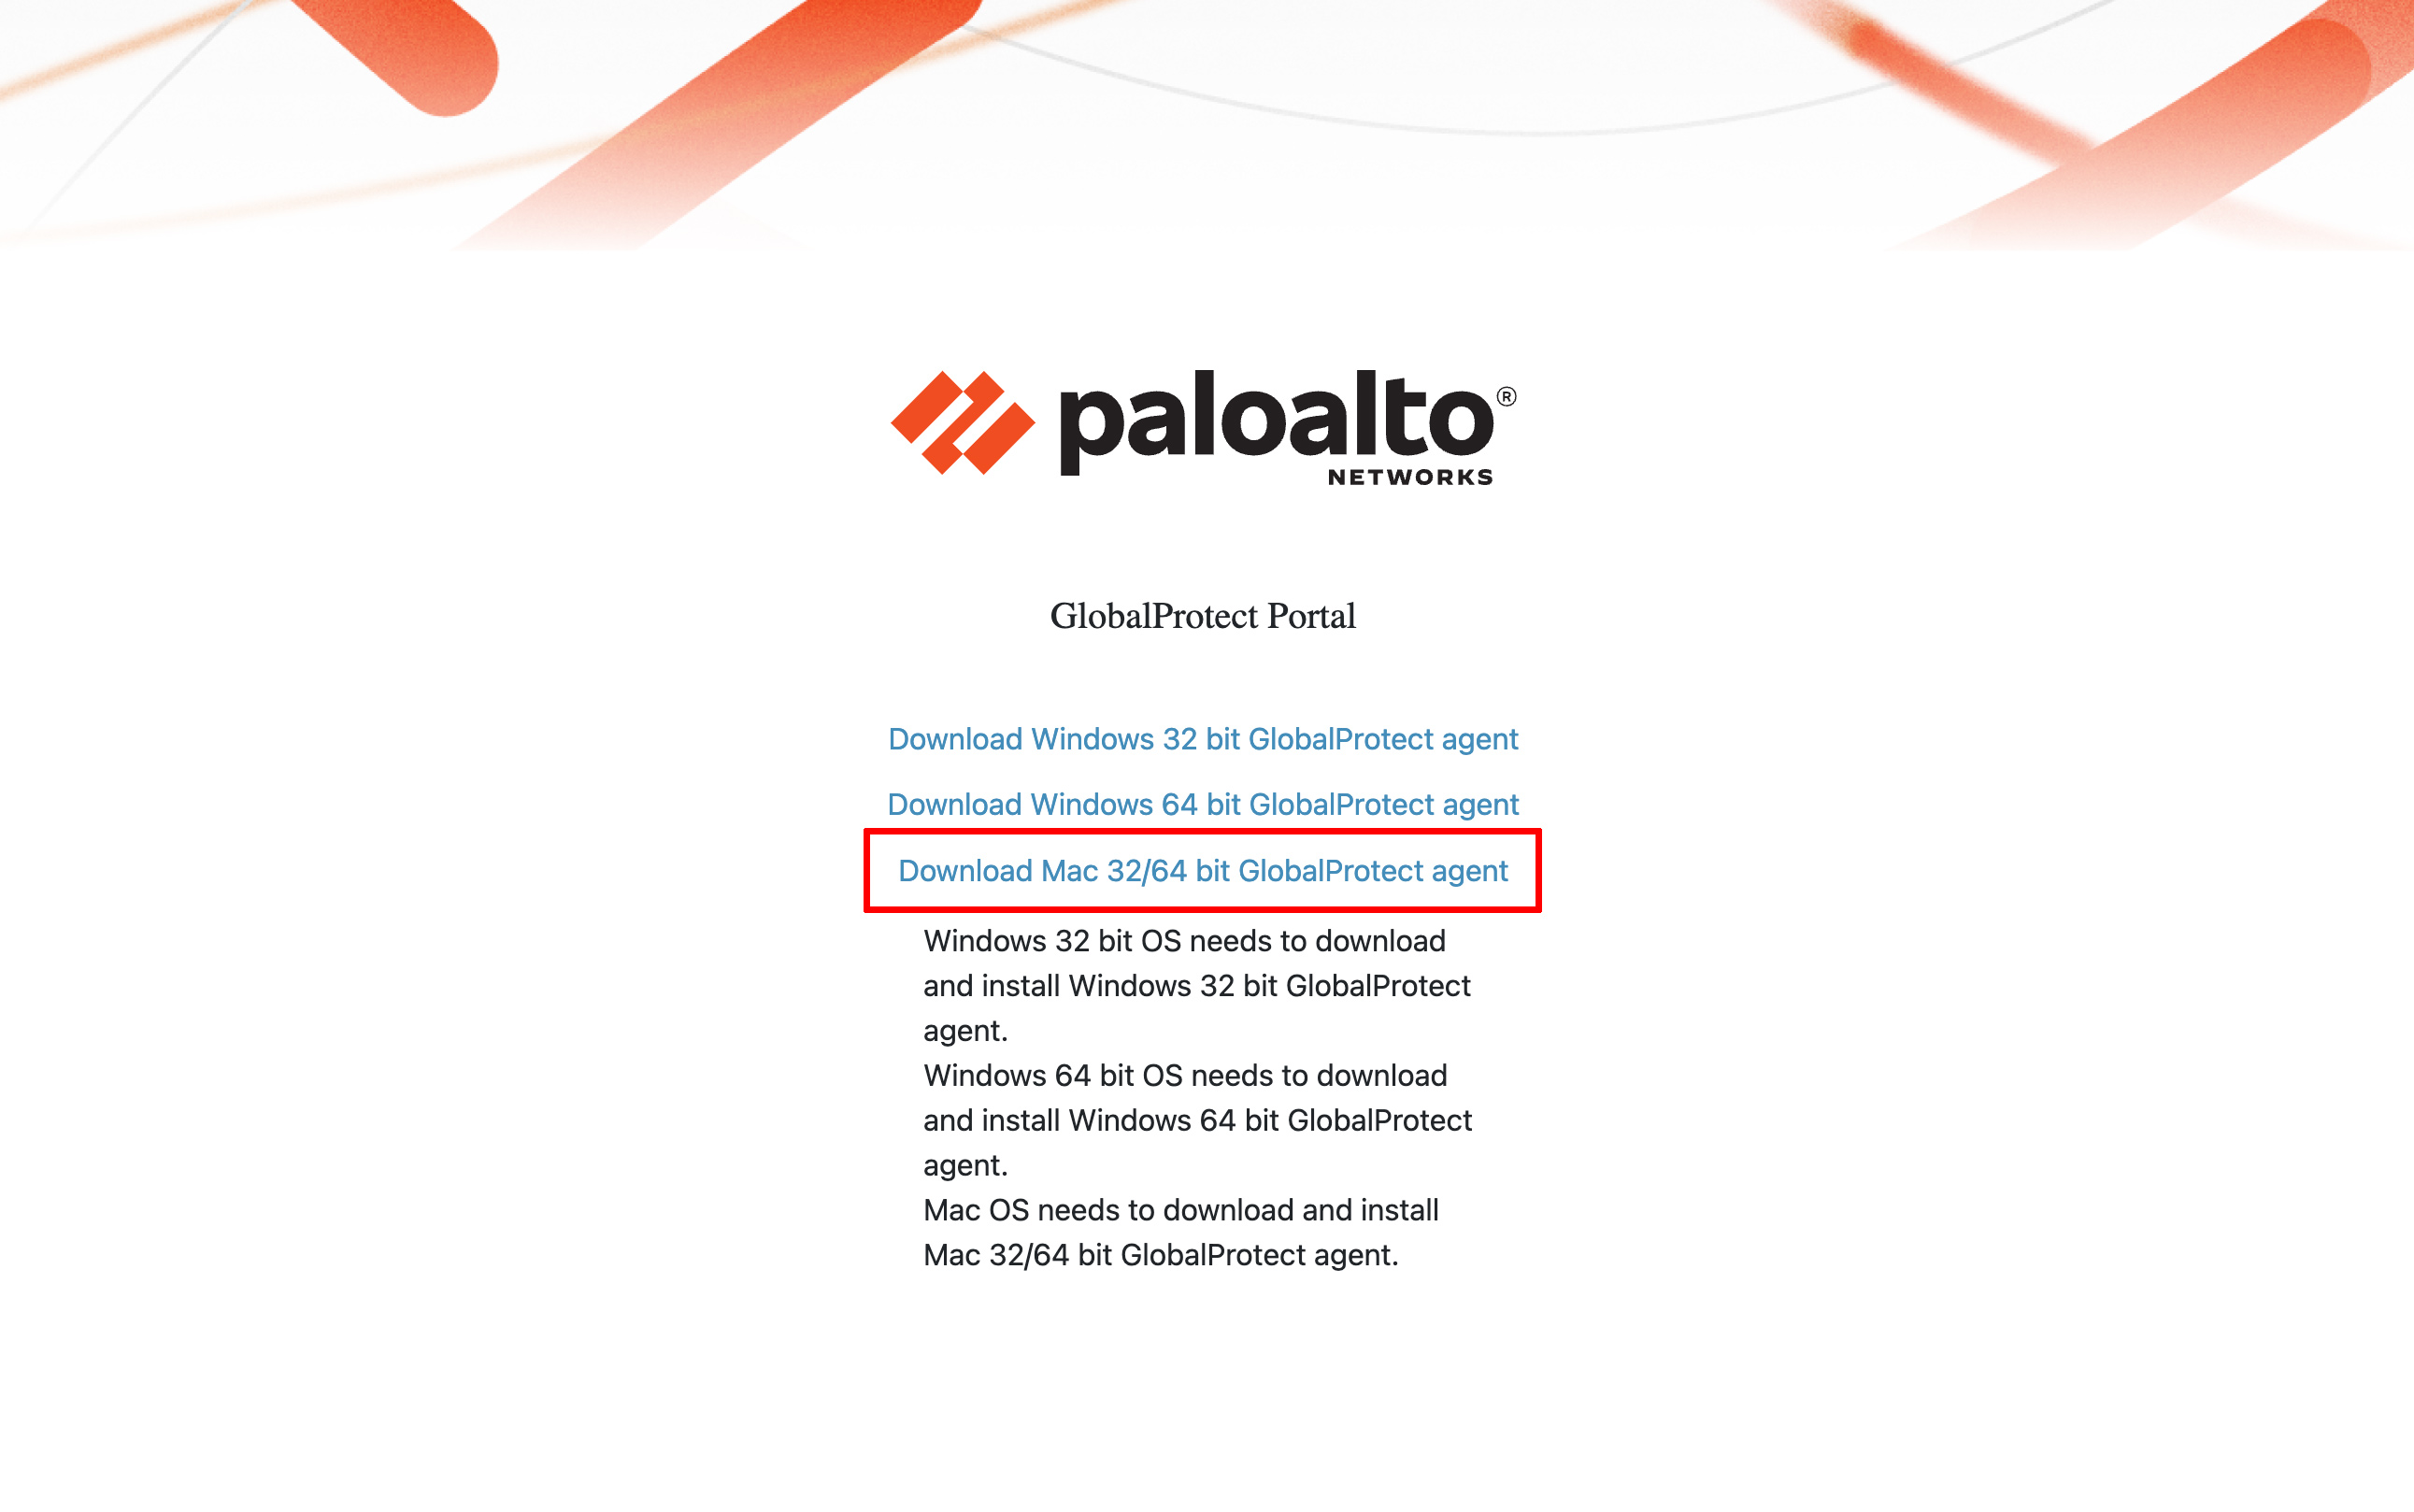 Paloalto networks global protect download page. 'Download Mac 32-64 bit Global Protect agent' is highlighted